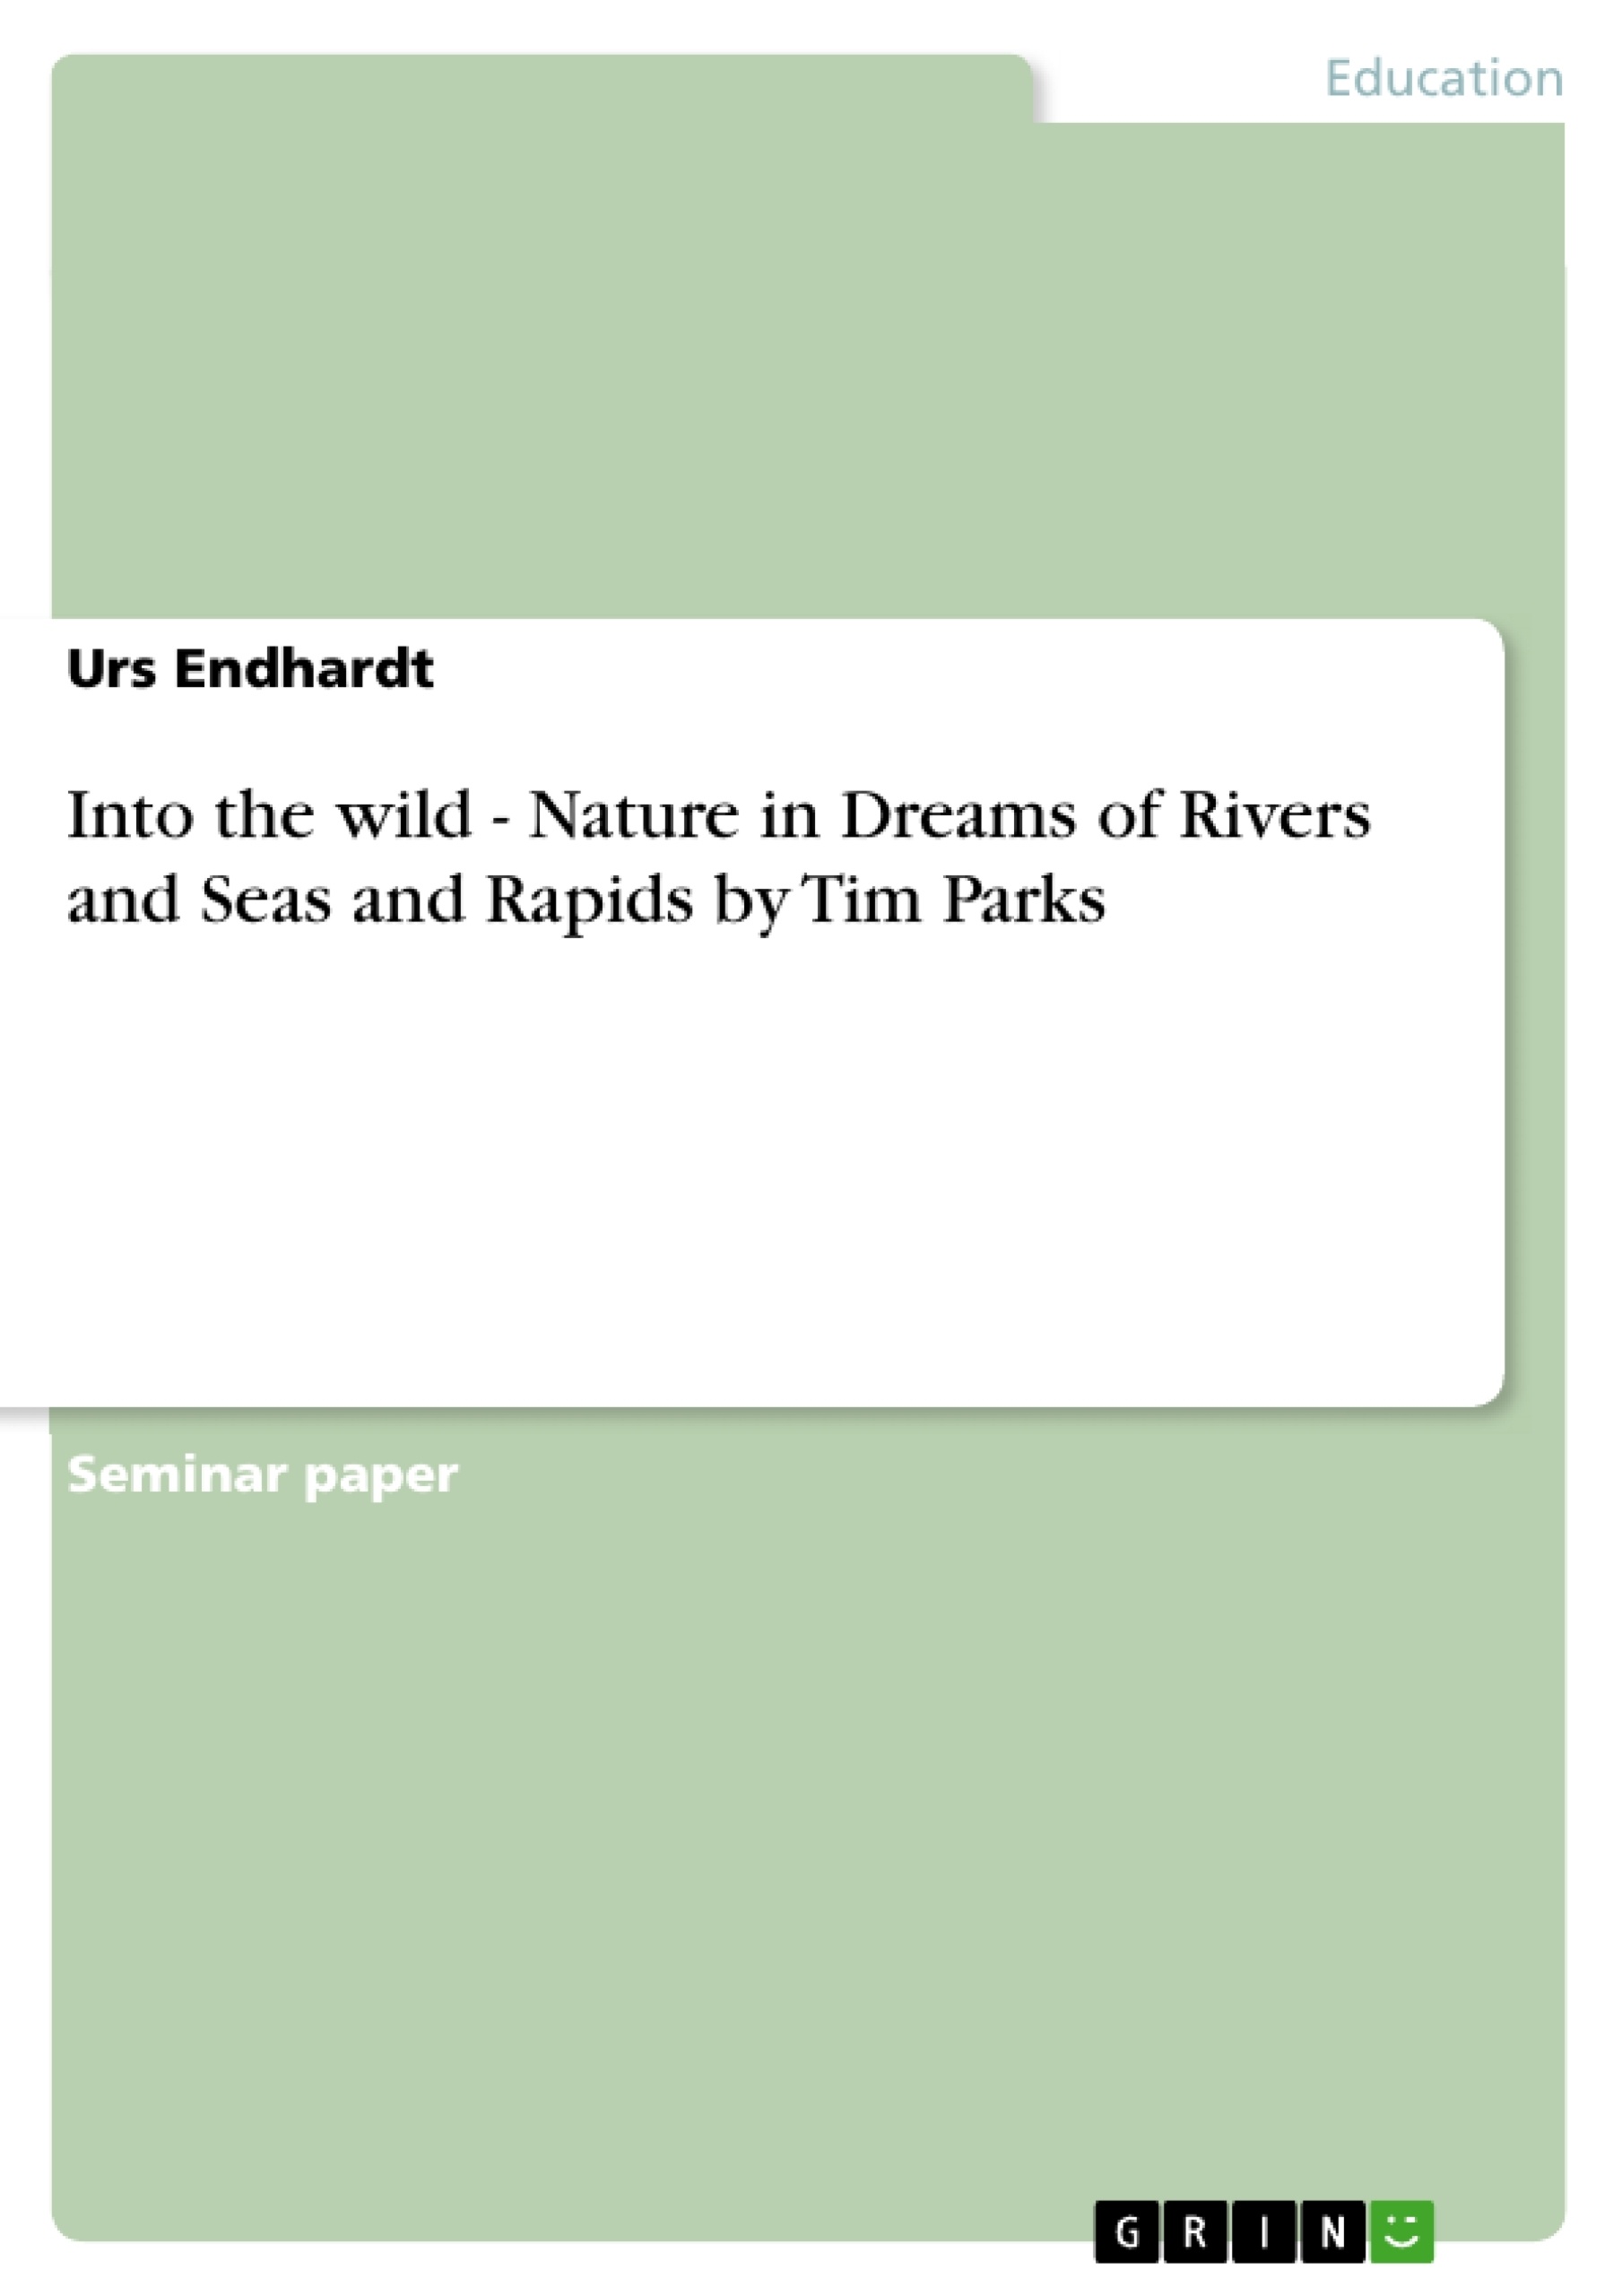 Titre: Into the wild - Nature in Dreams of Rivers and Seas and Rapids by Tim Parks